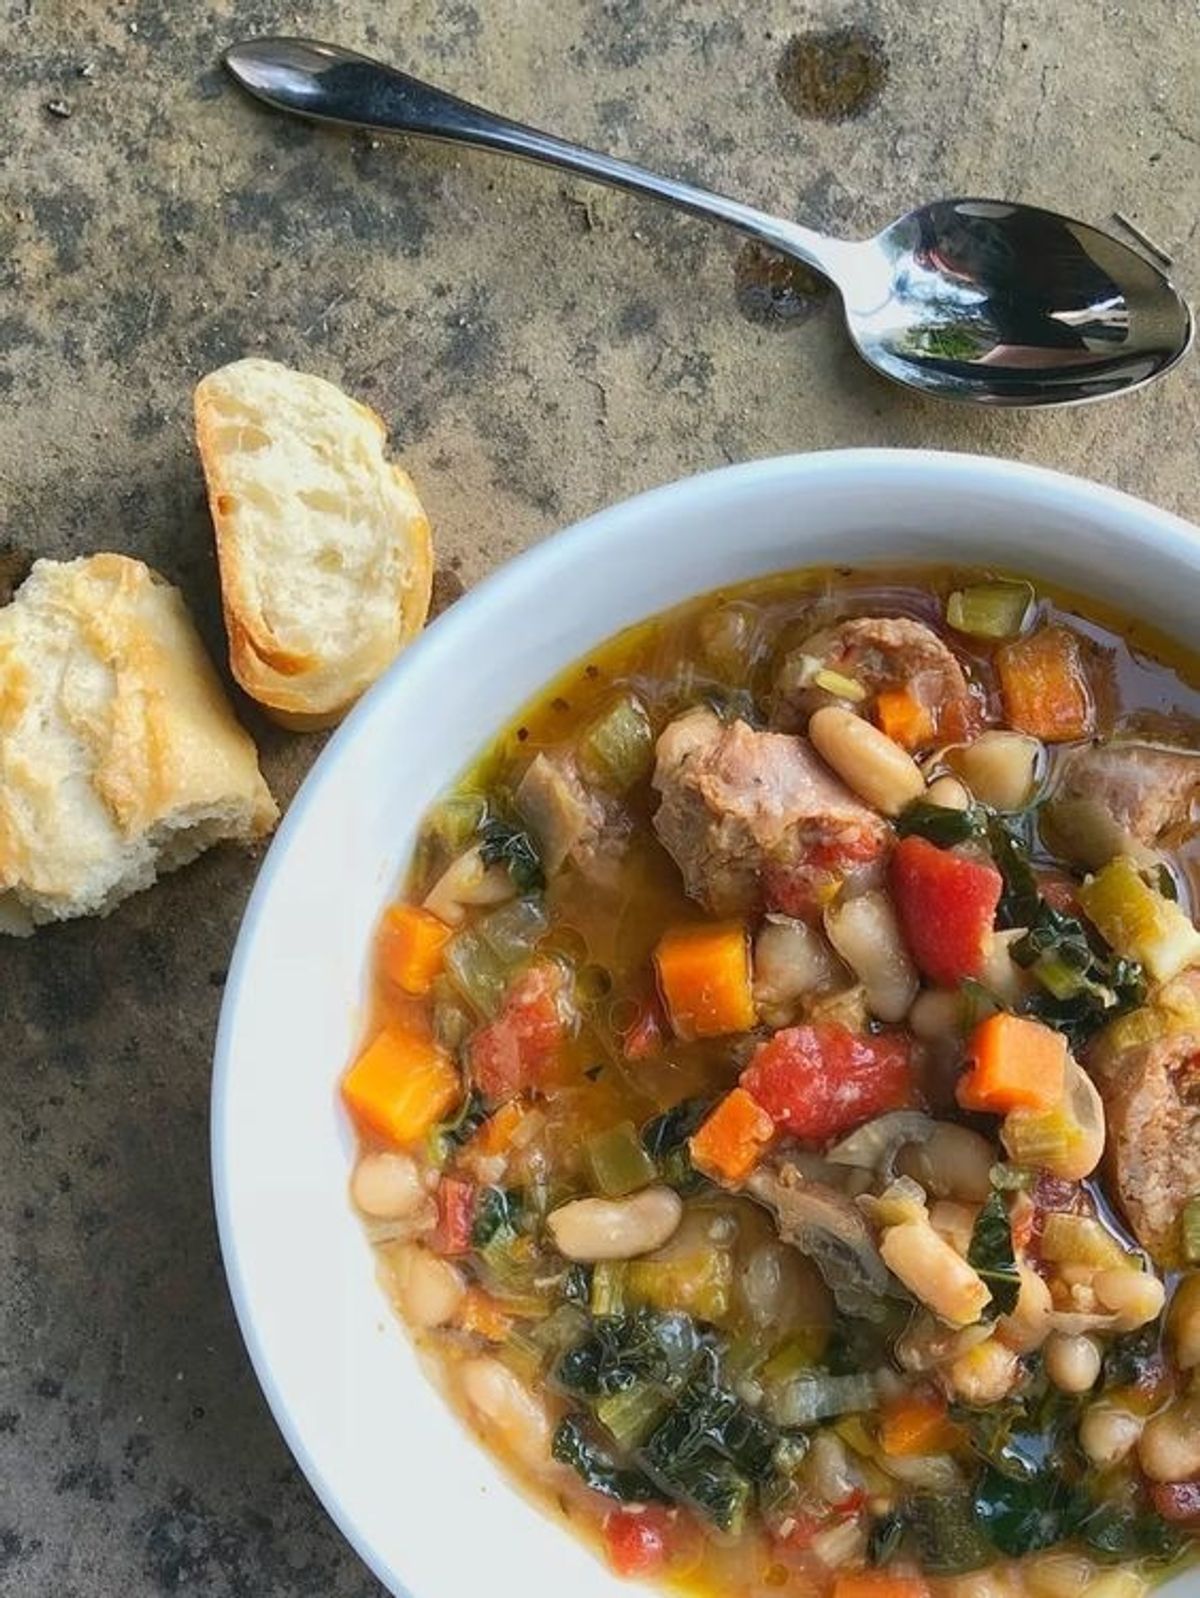 Make This Ridiculously Easy Instant Pot Tuscan White Bean Soup Recipe to Eat All Week Long